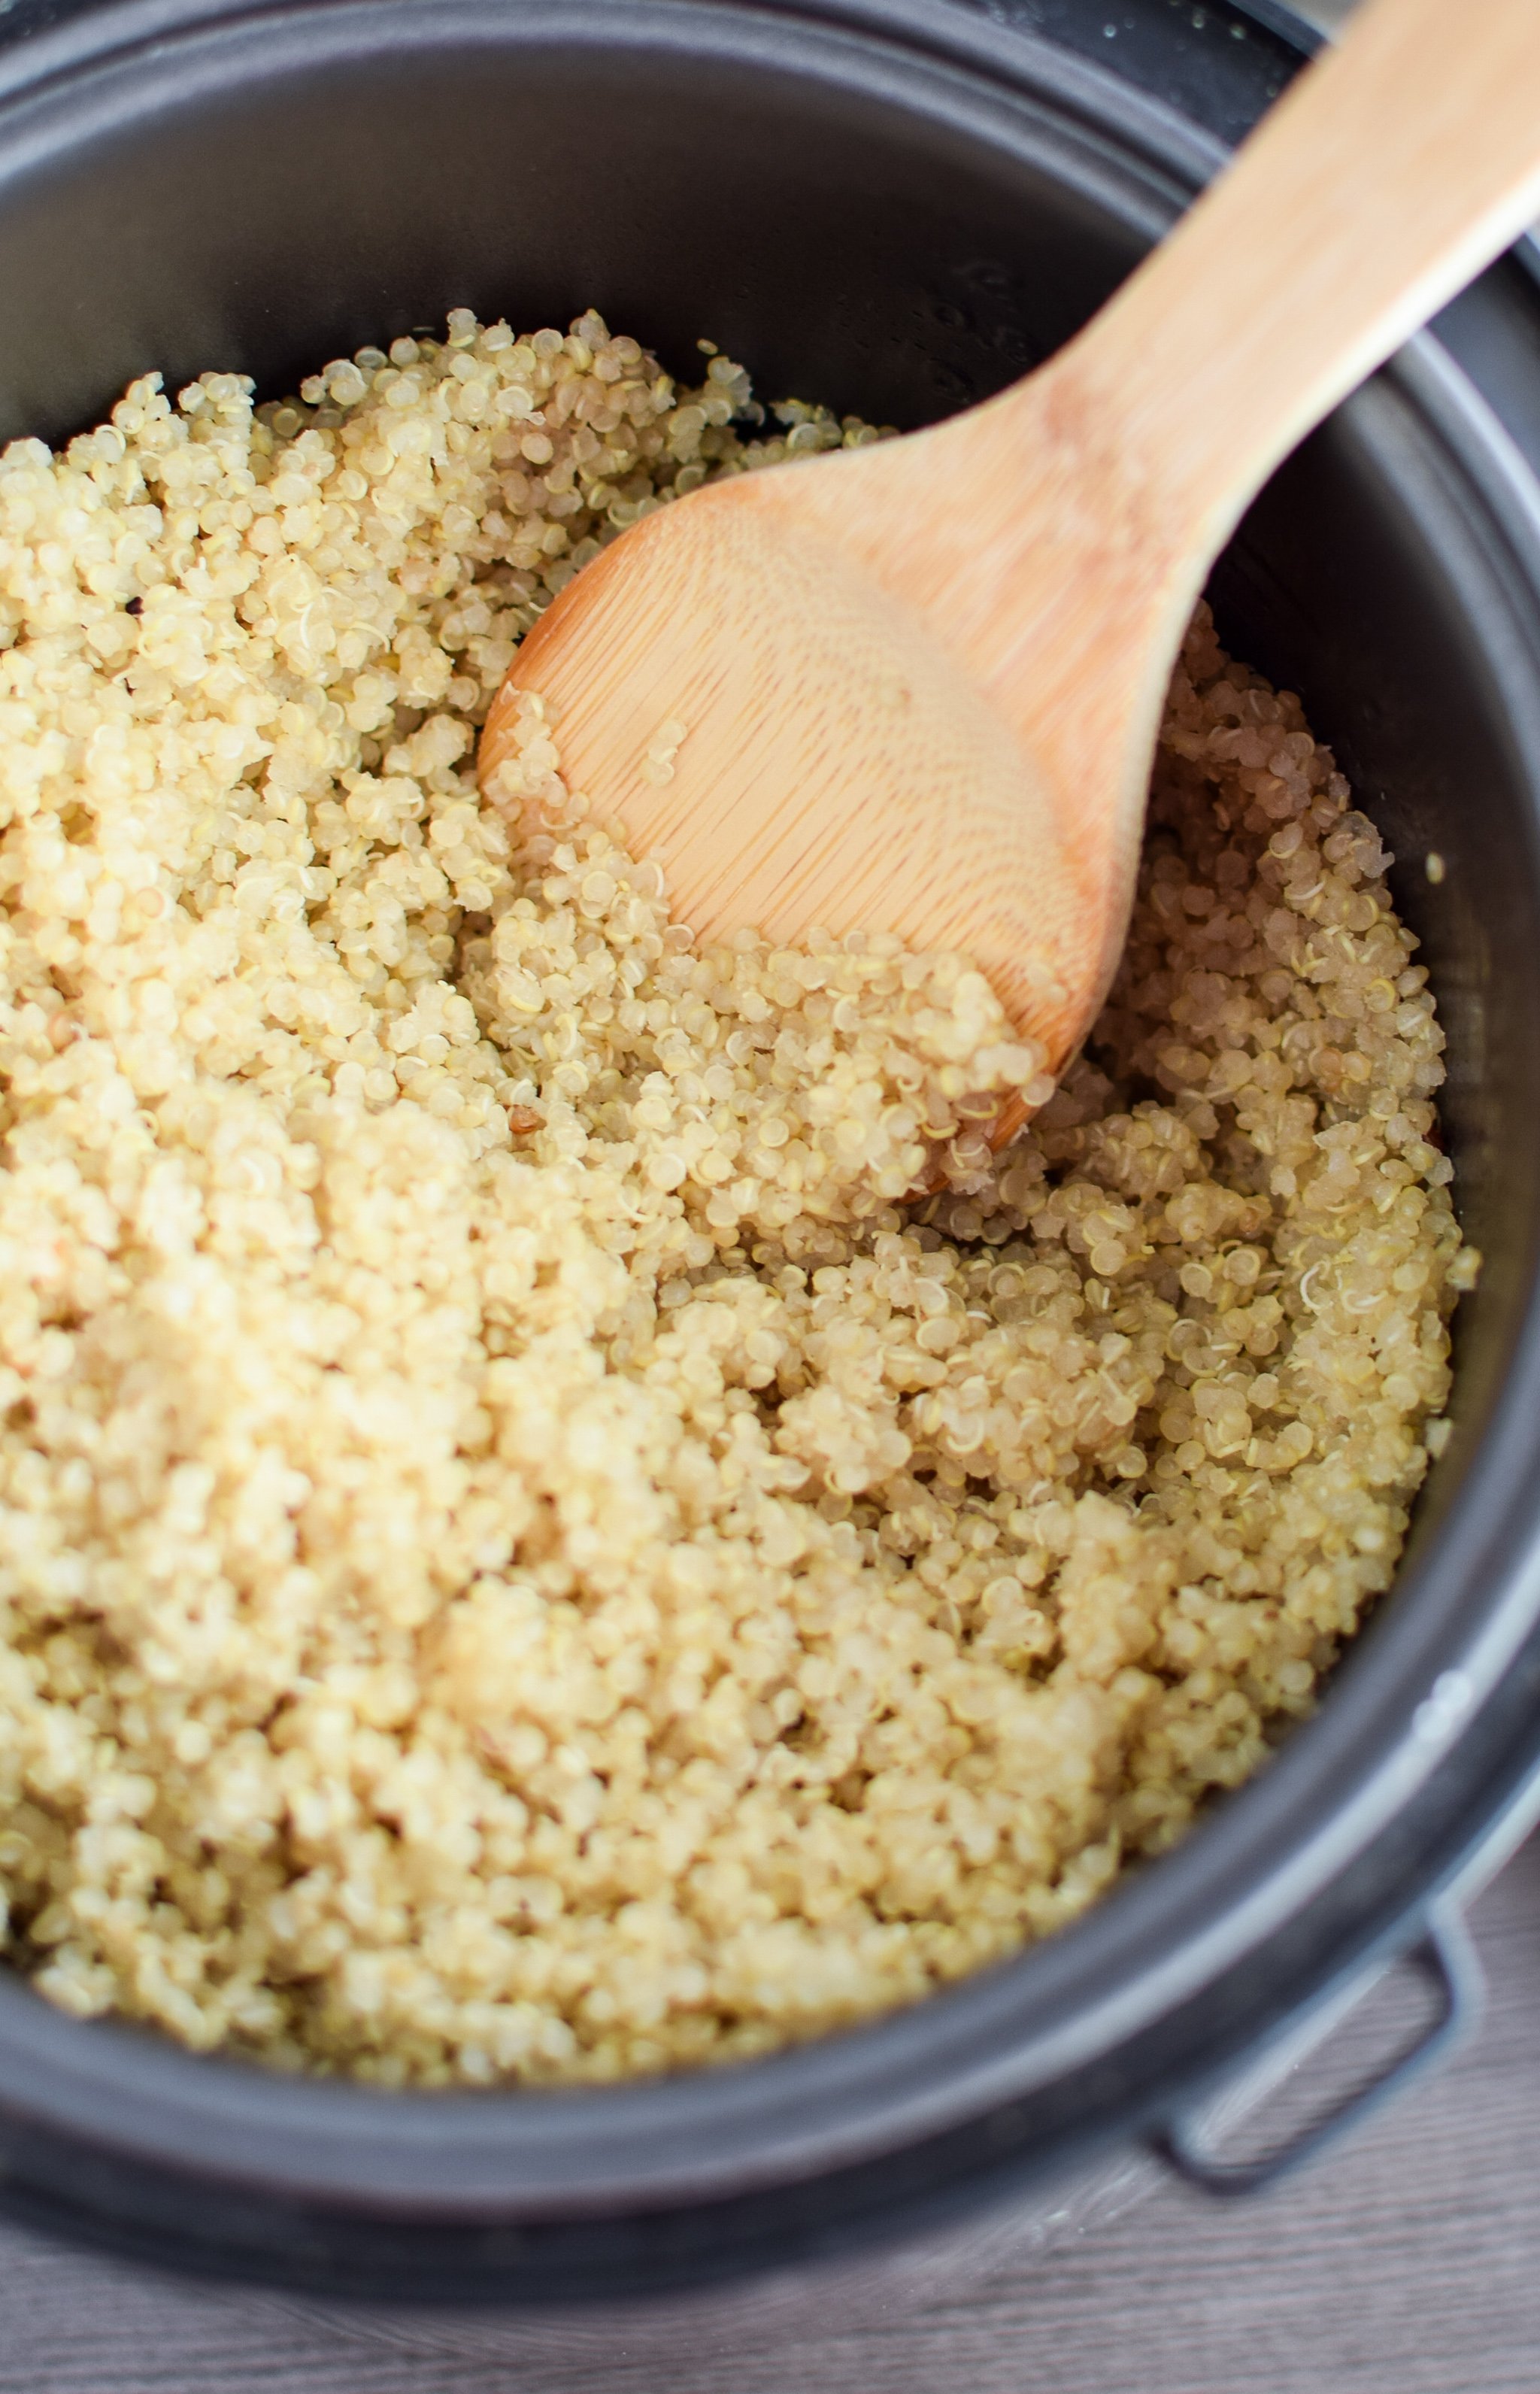 Cooked quinoa made in a rice cooker.